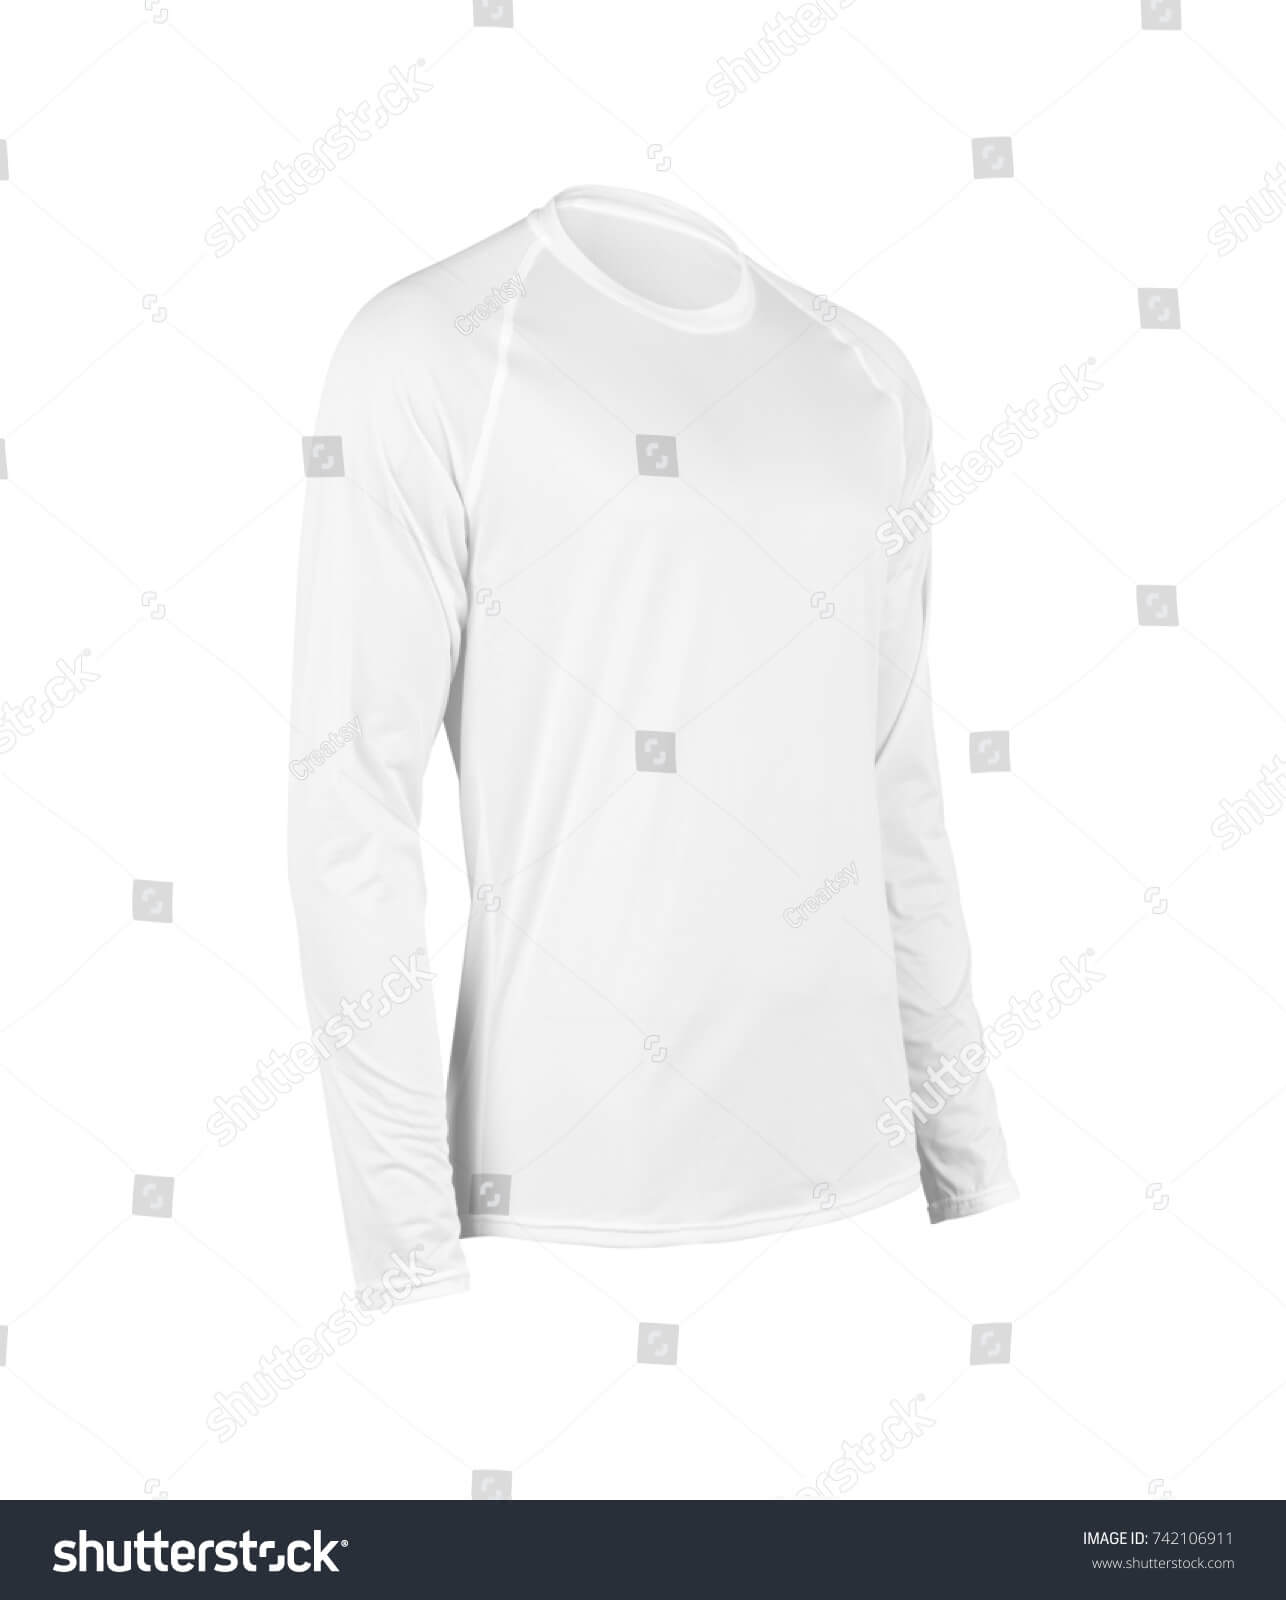 White Men Running Jersey Bike Clothing Stock Photo (Edit Now With Regard To Blank Cycling Jersey Template